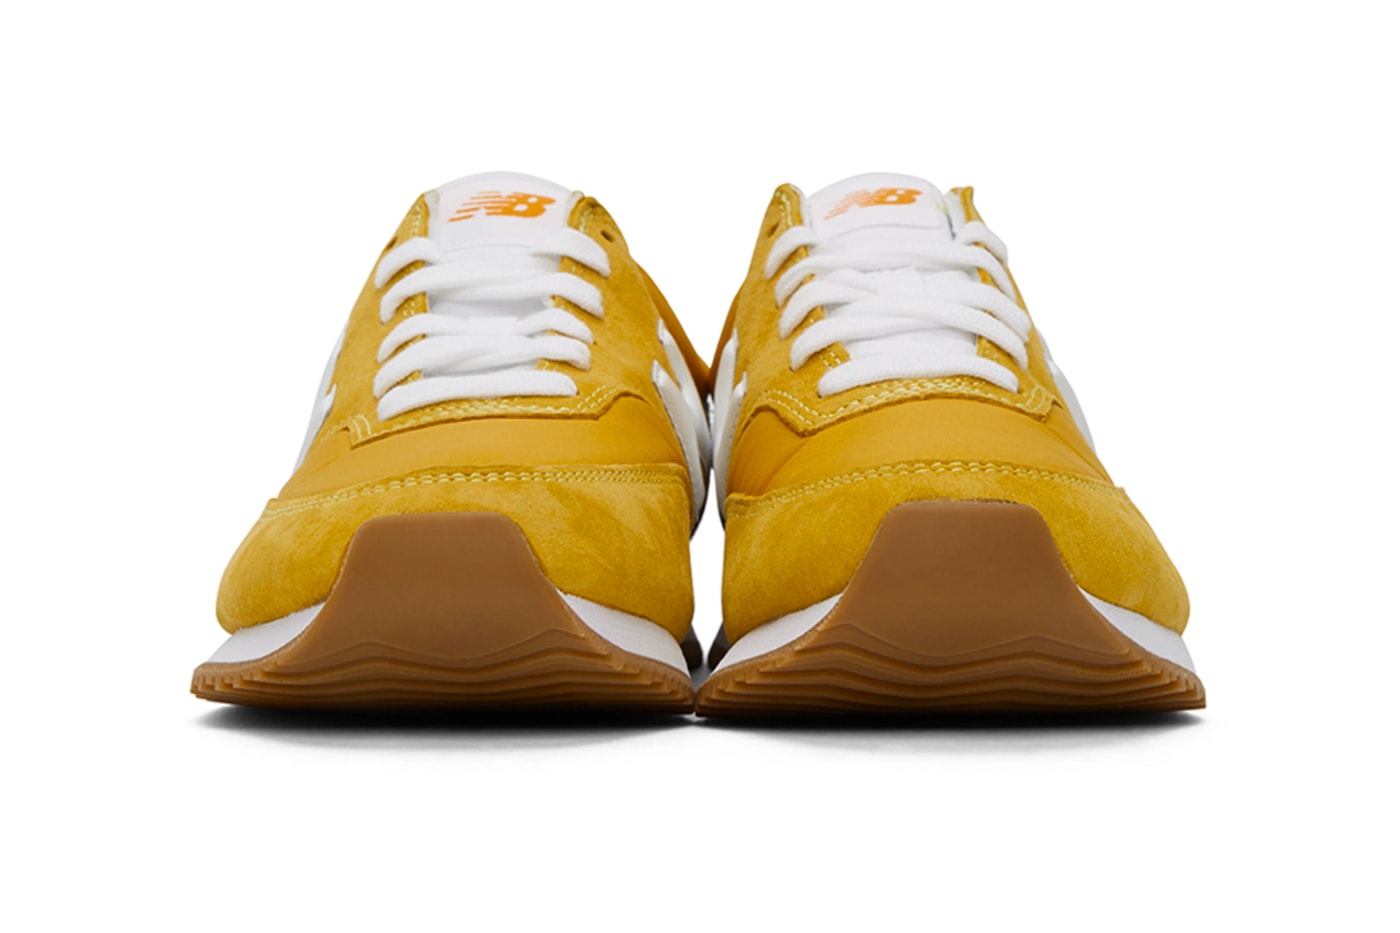 Junya Watanabe New Balance COMP 100 Yellow menswear streetwear sneakers shoes footwear spring summer 2020 collection leather suede kicks trainers runners japanese designer